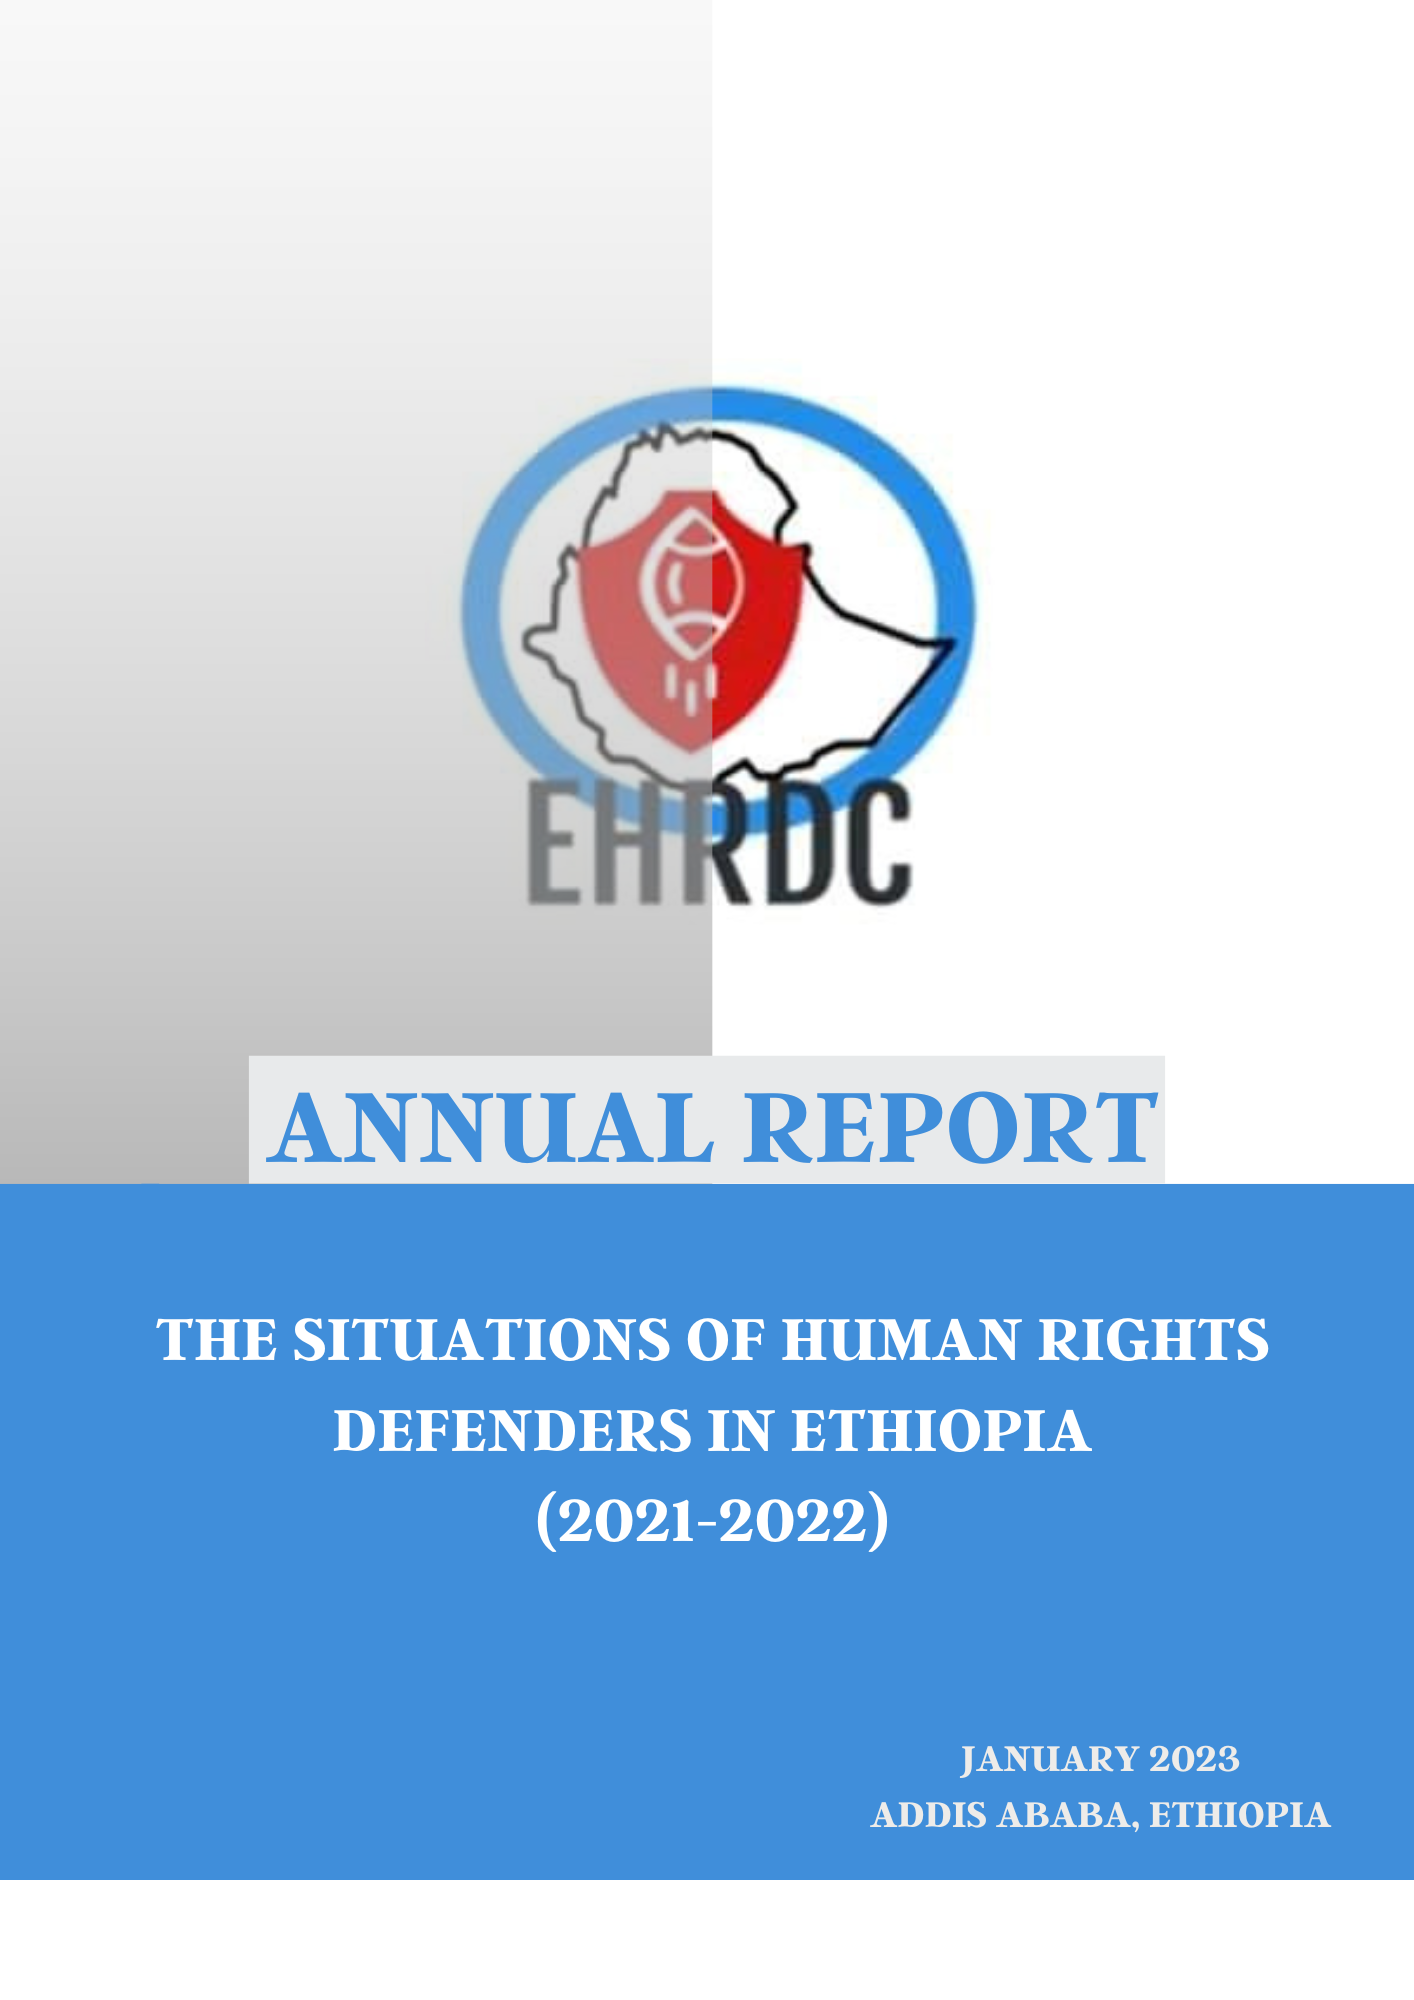 EHRDC launched its first Annual Report on Situations of Human Rights Defenders in Ethiopian 2023